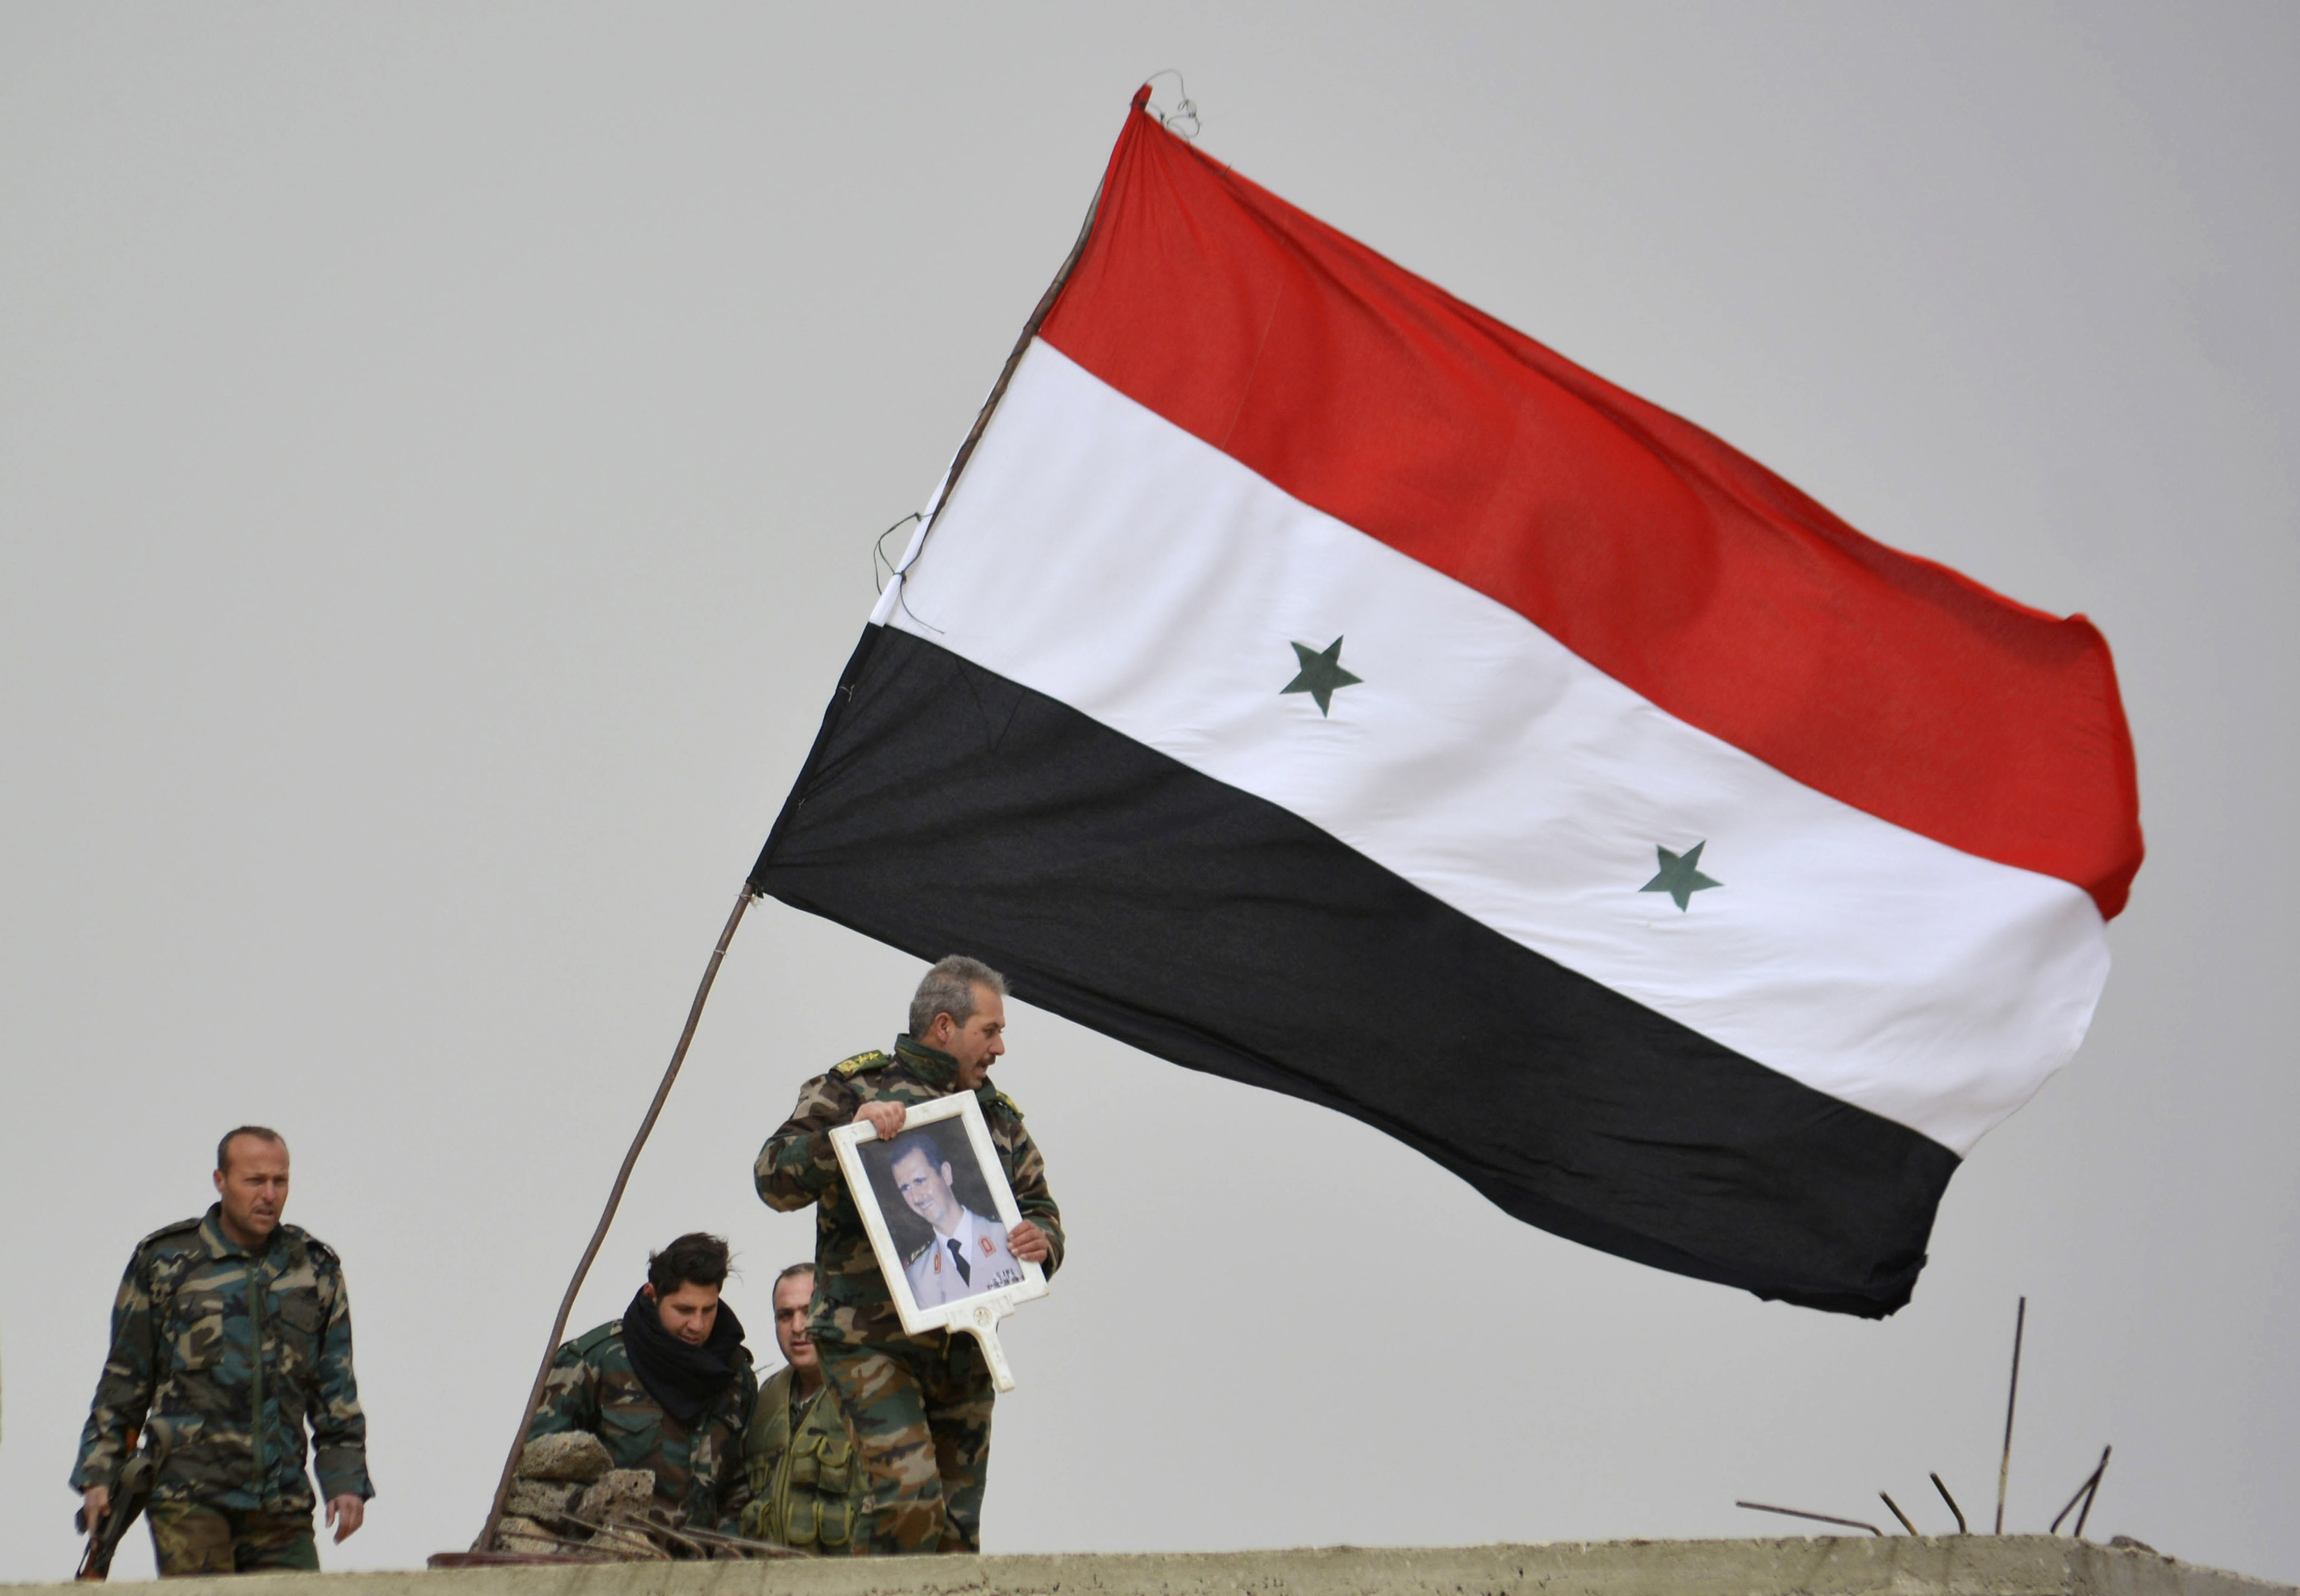 Syrian government raises flag in Deraa, birthplace of revolt